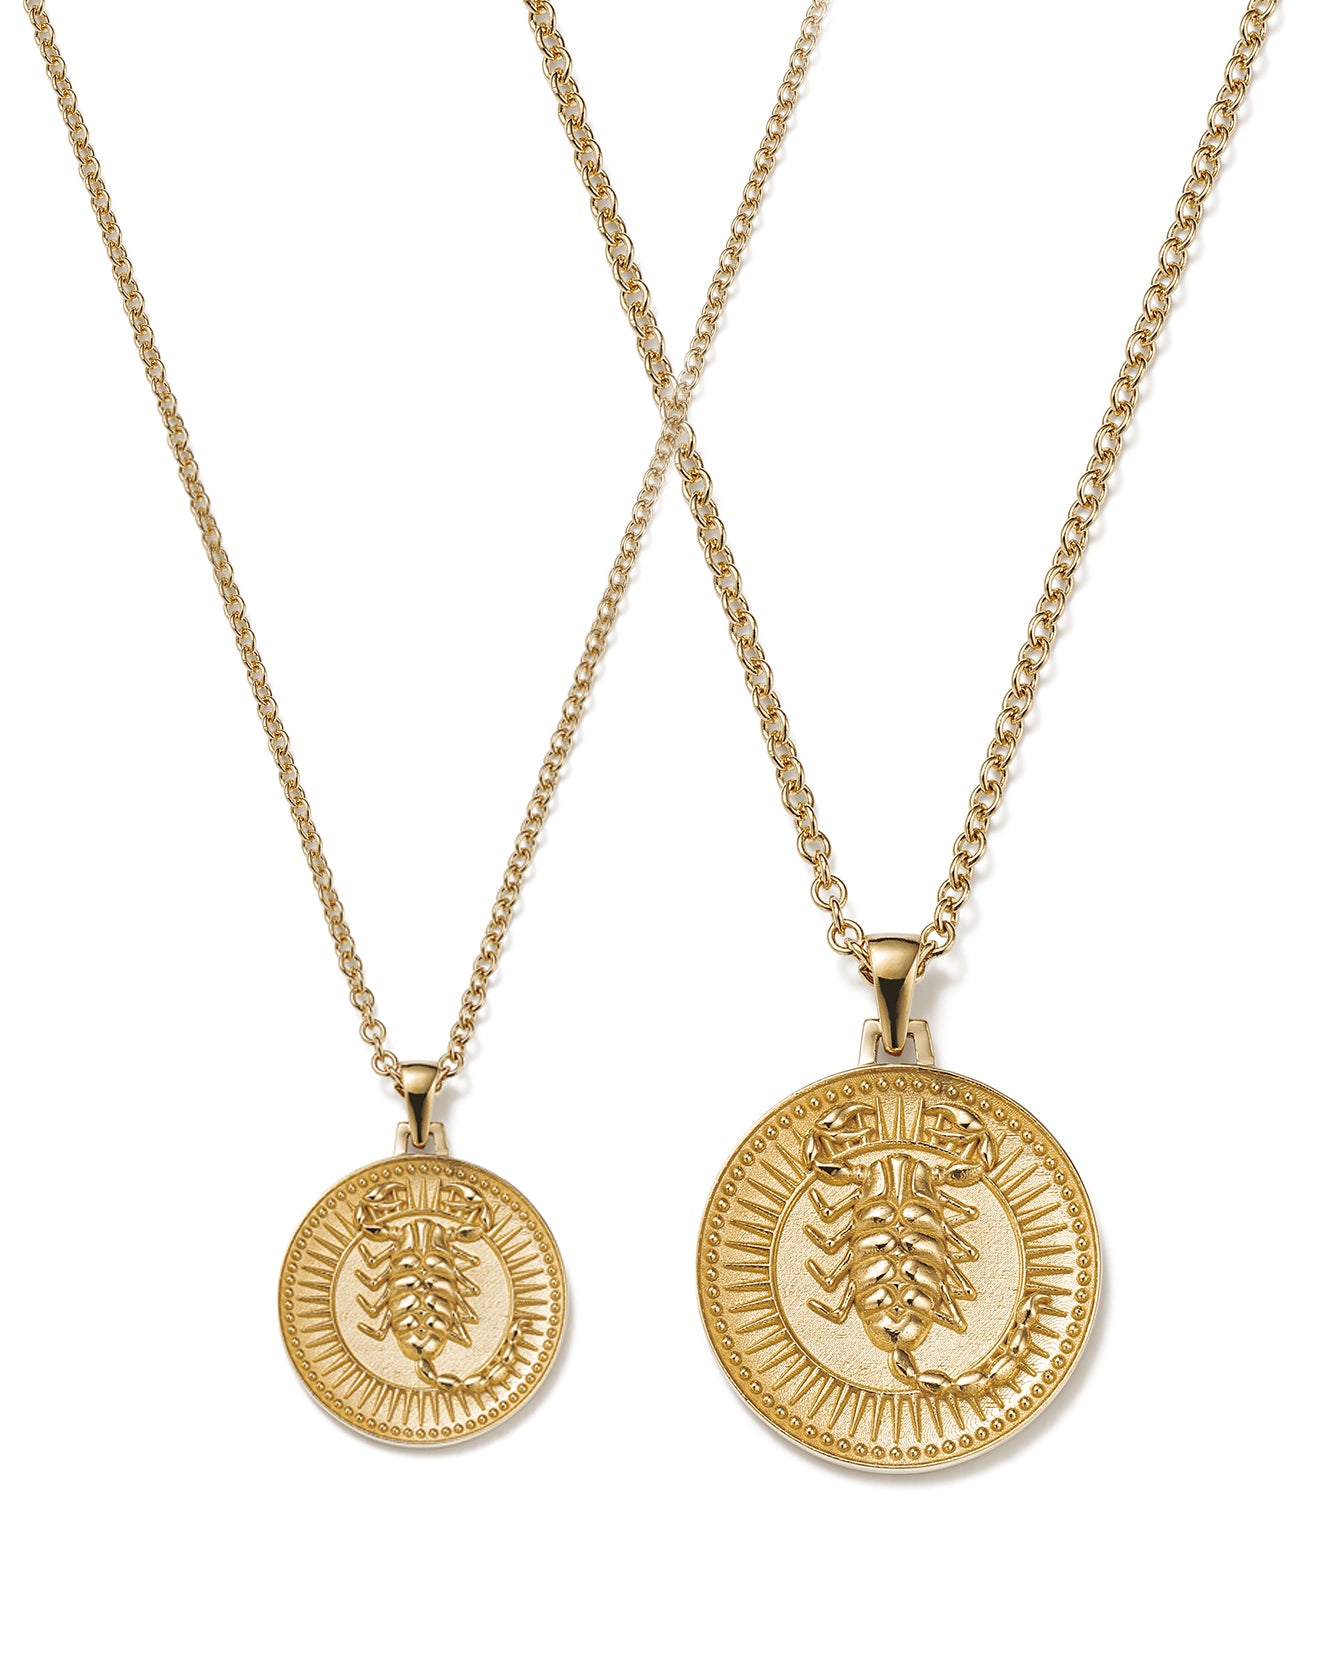 Small and Large Ethical Gold Scorpio Pendant Necklaces Side By Side on a White Background